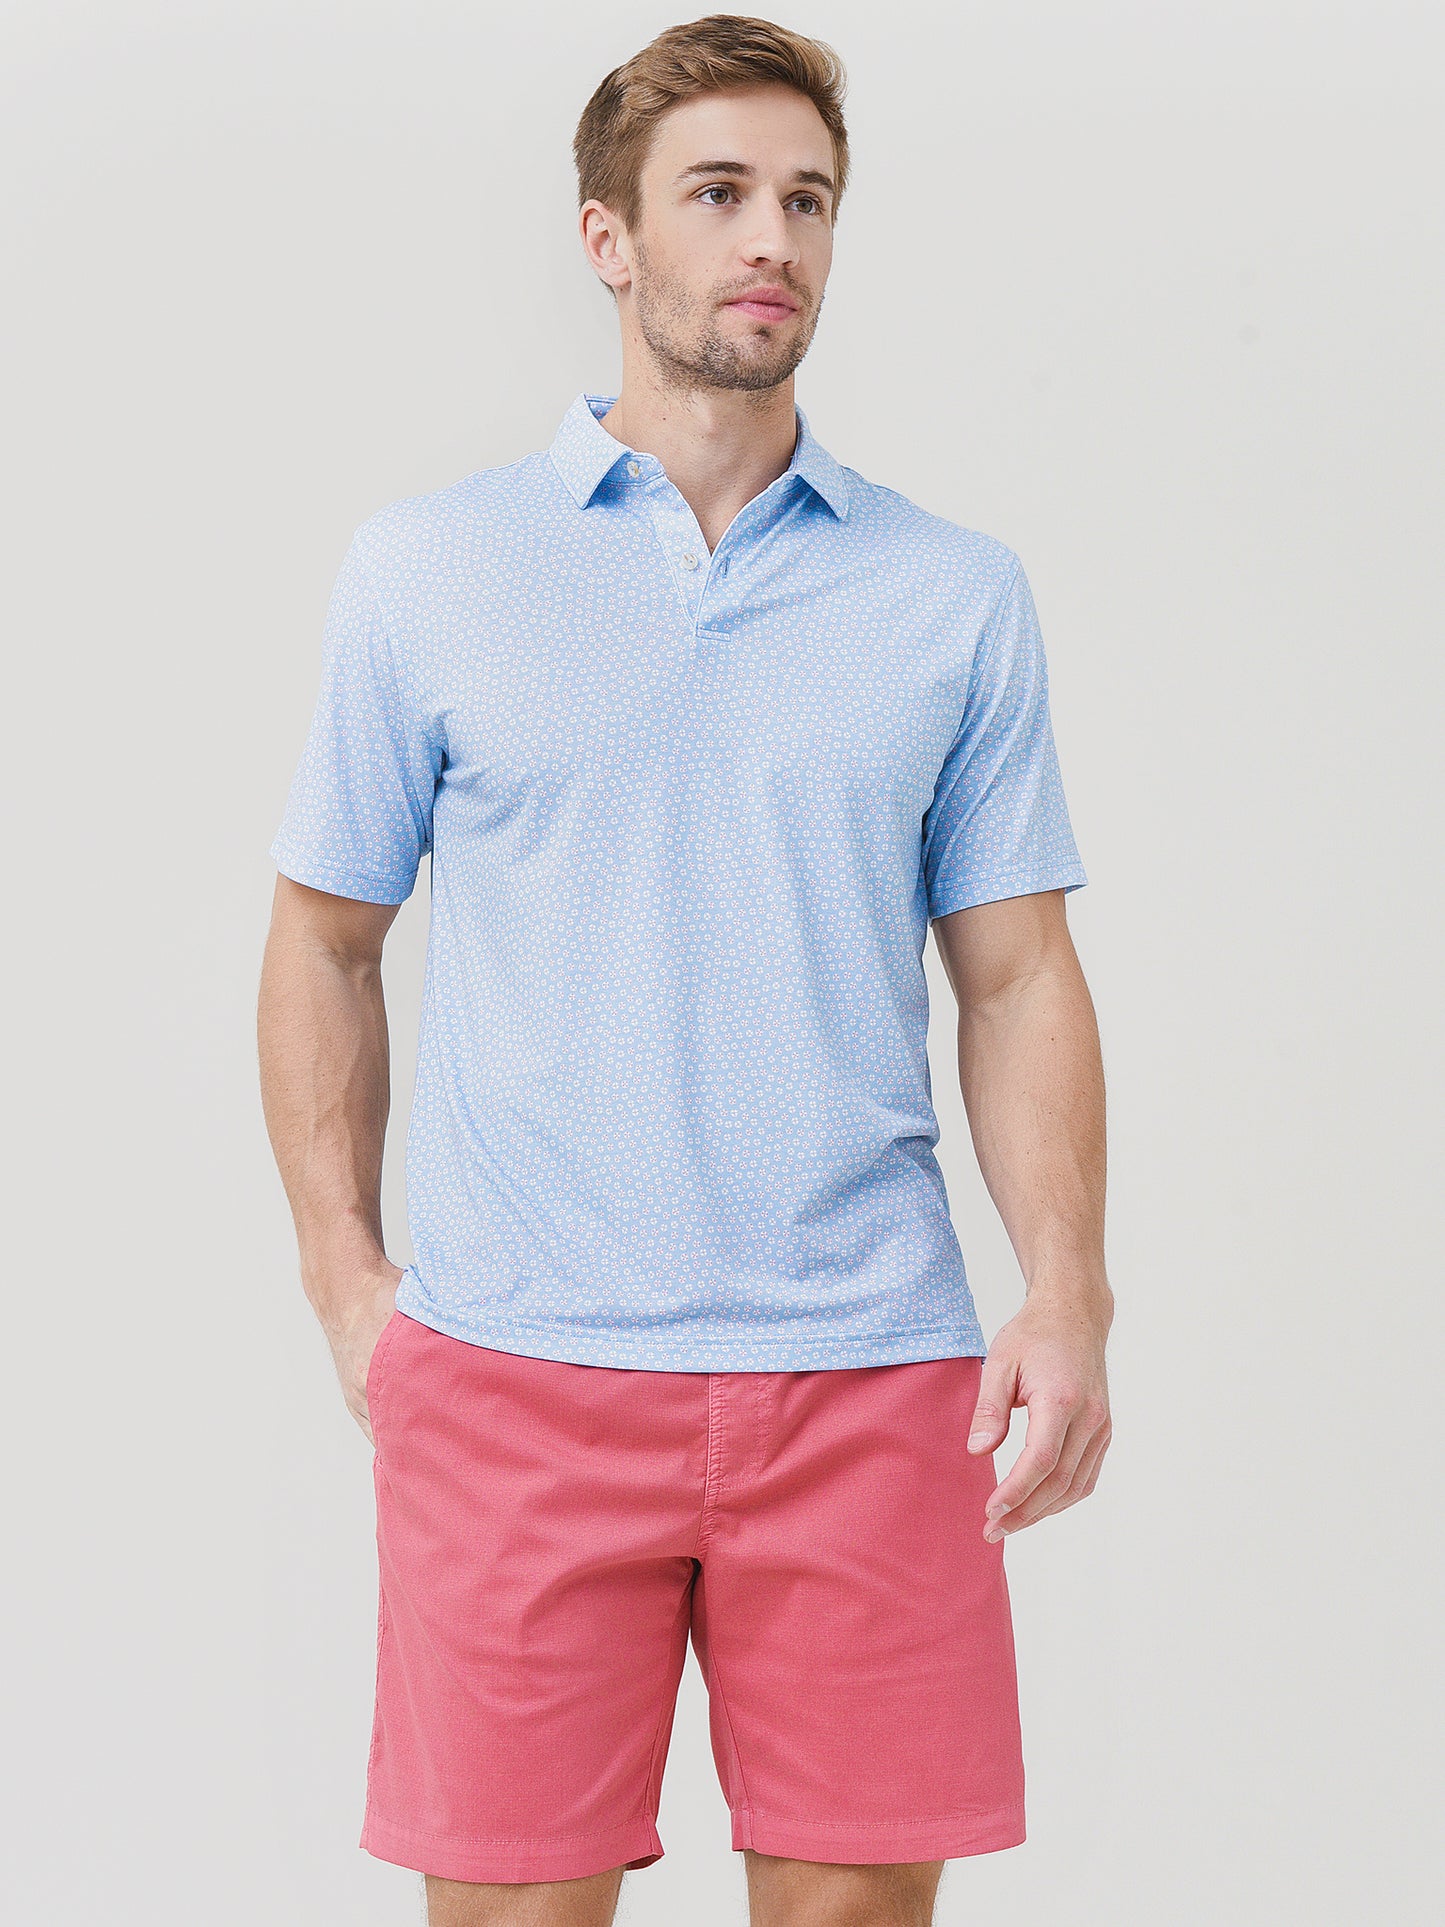 Peter Millar Seaside Men's Drirelease® Natural Touch Floats Polo